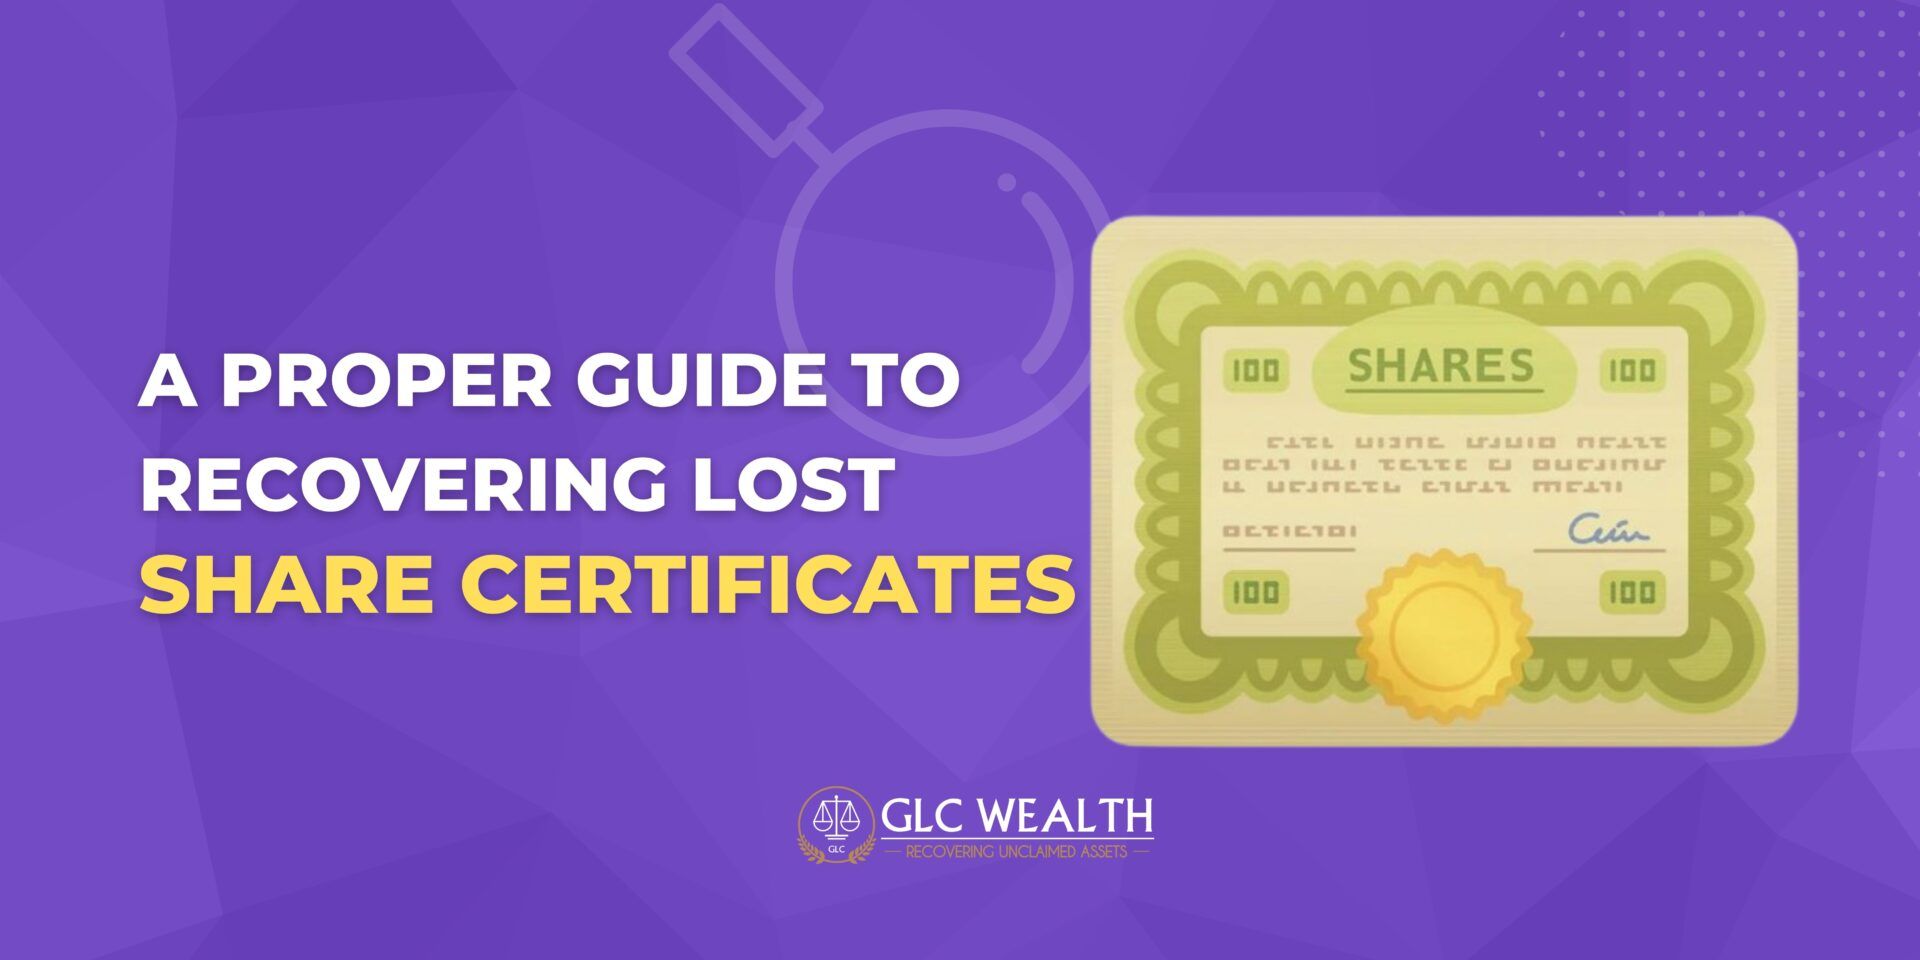 A Proper Guide to Recovering Lost Share Certificates